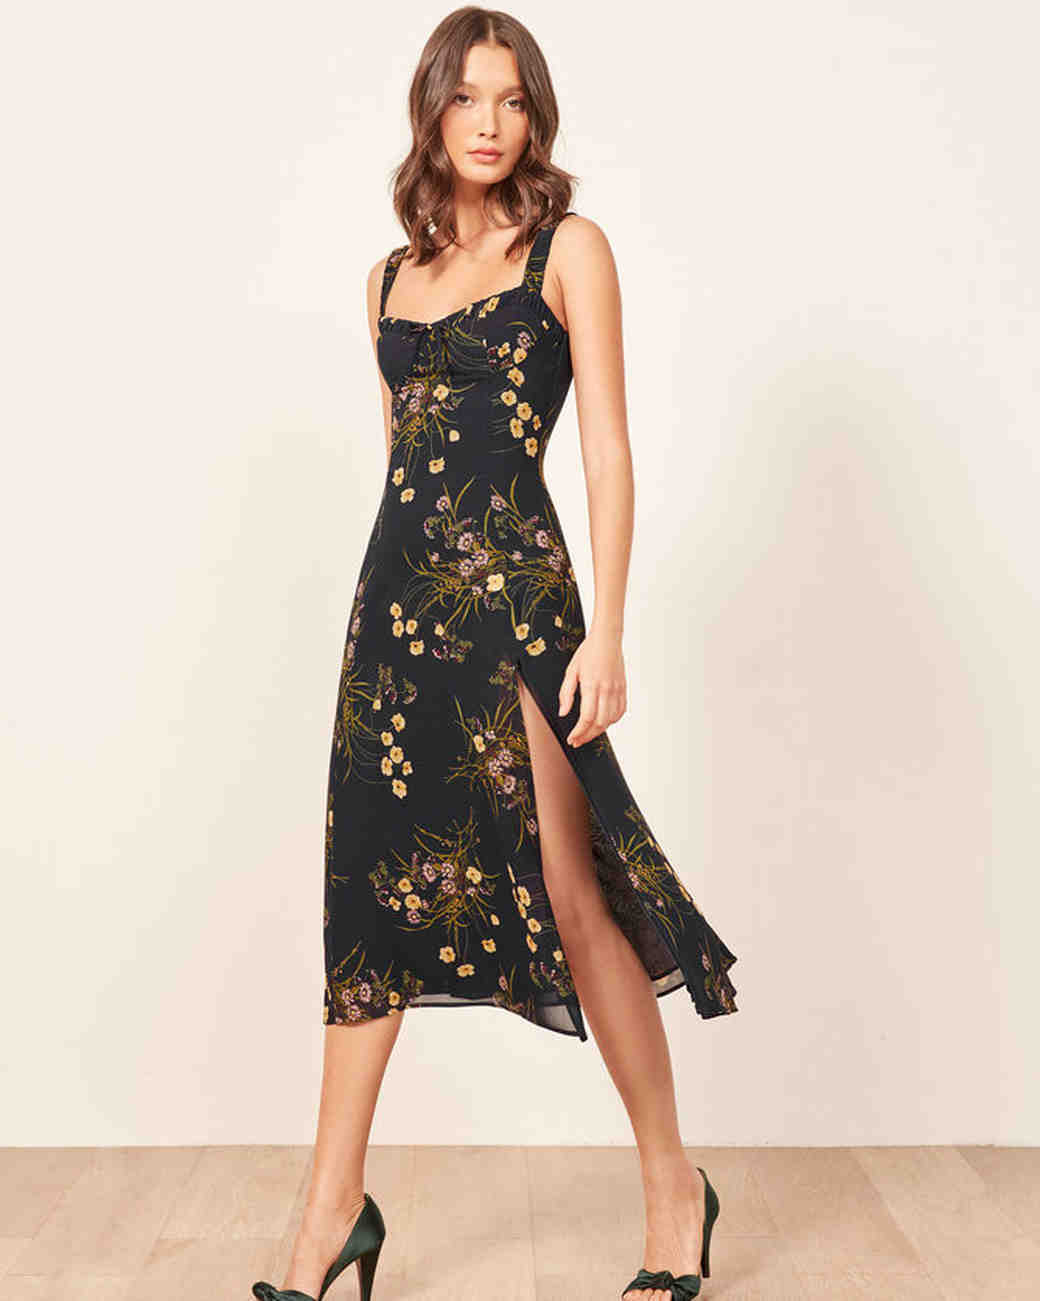 Dresses To Wear To A Wedding As A Guest
 25 Beautiful Dresses to Wear as a Wedding Guest This Fall